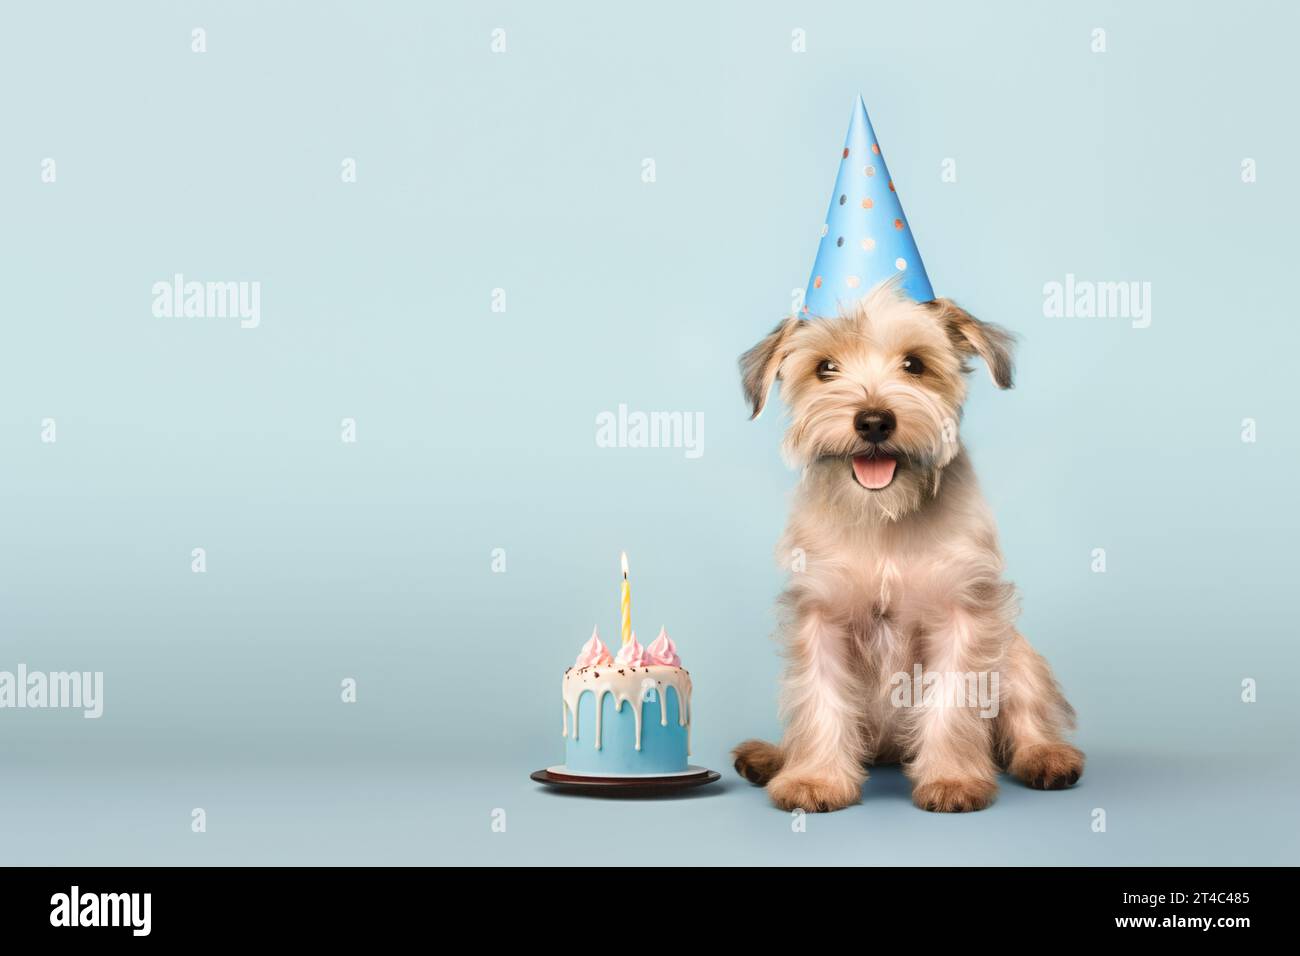 Happy cute scruffy dog celebrating with birthday cake and party hat, blue background with copy space to side Stock Photo